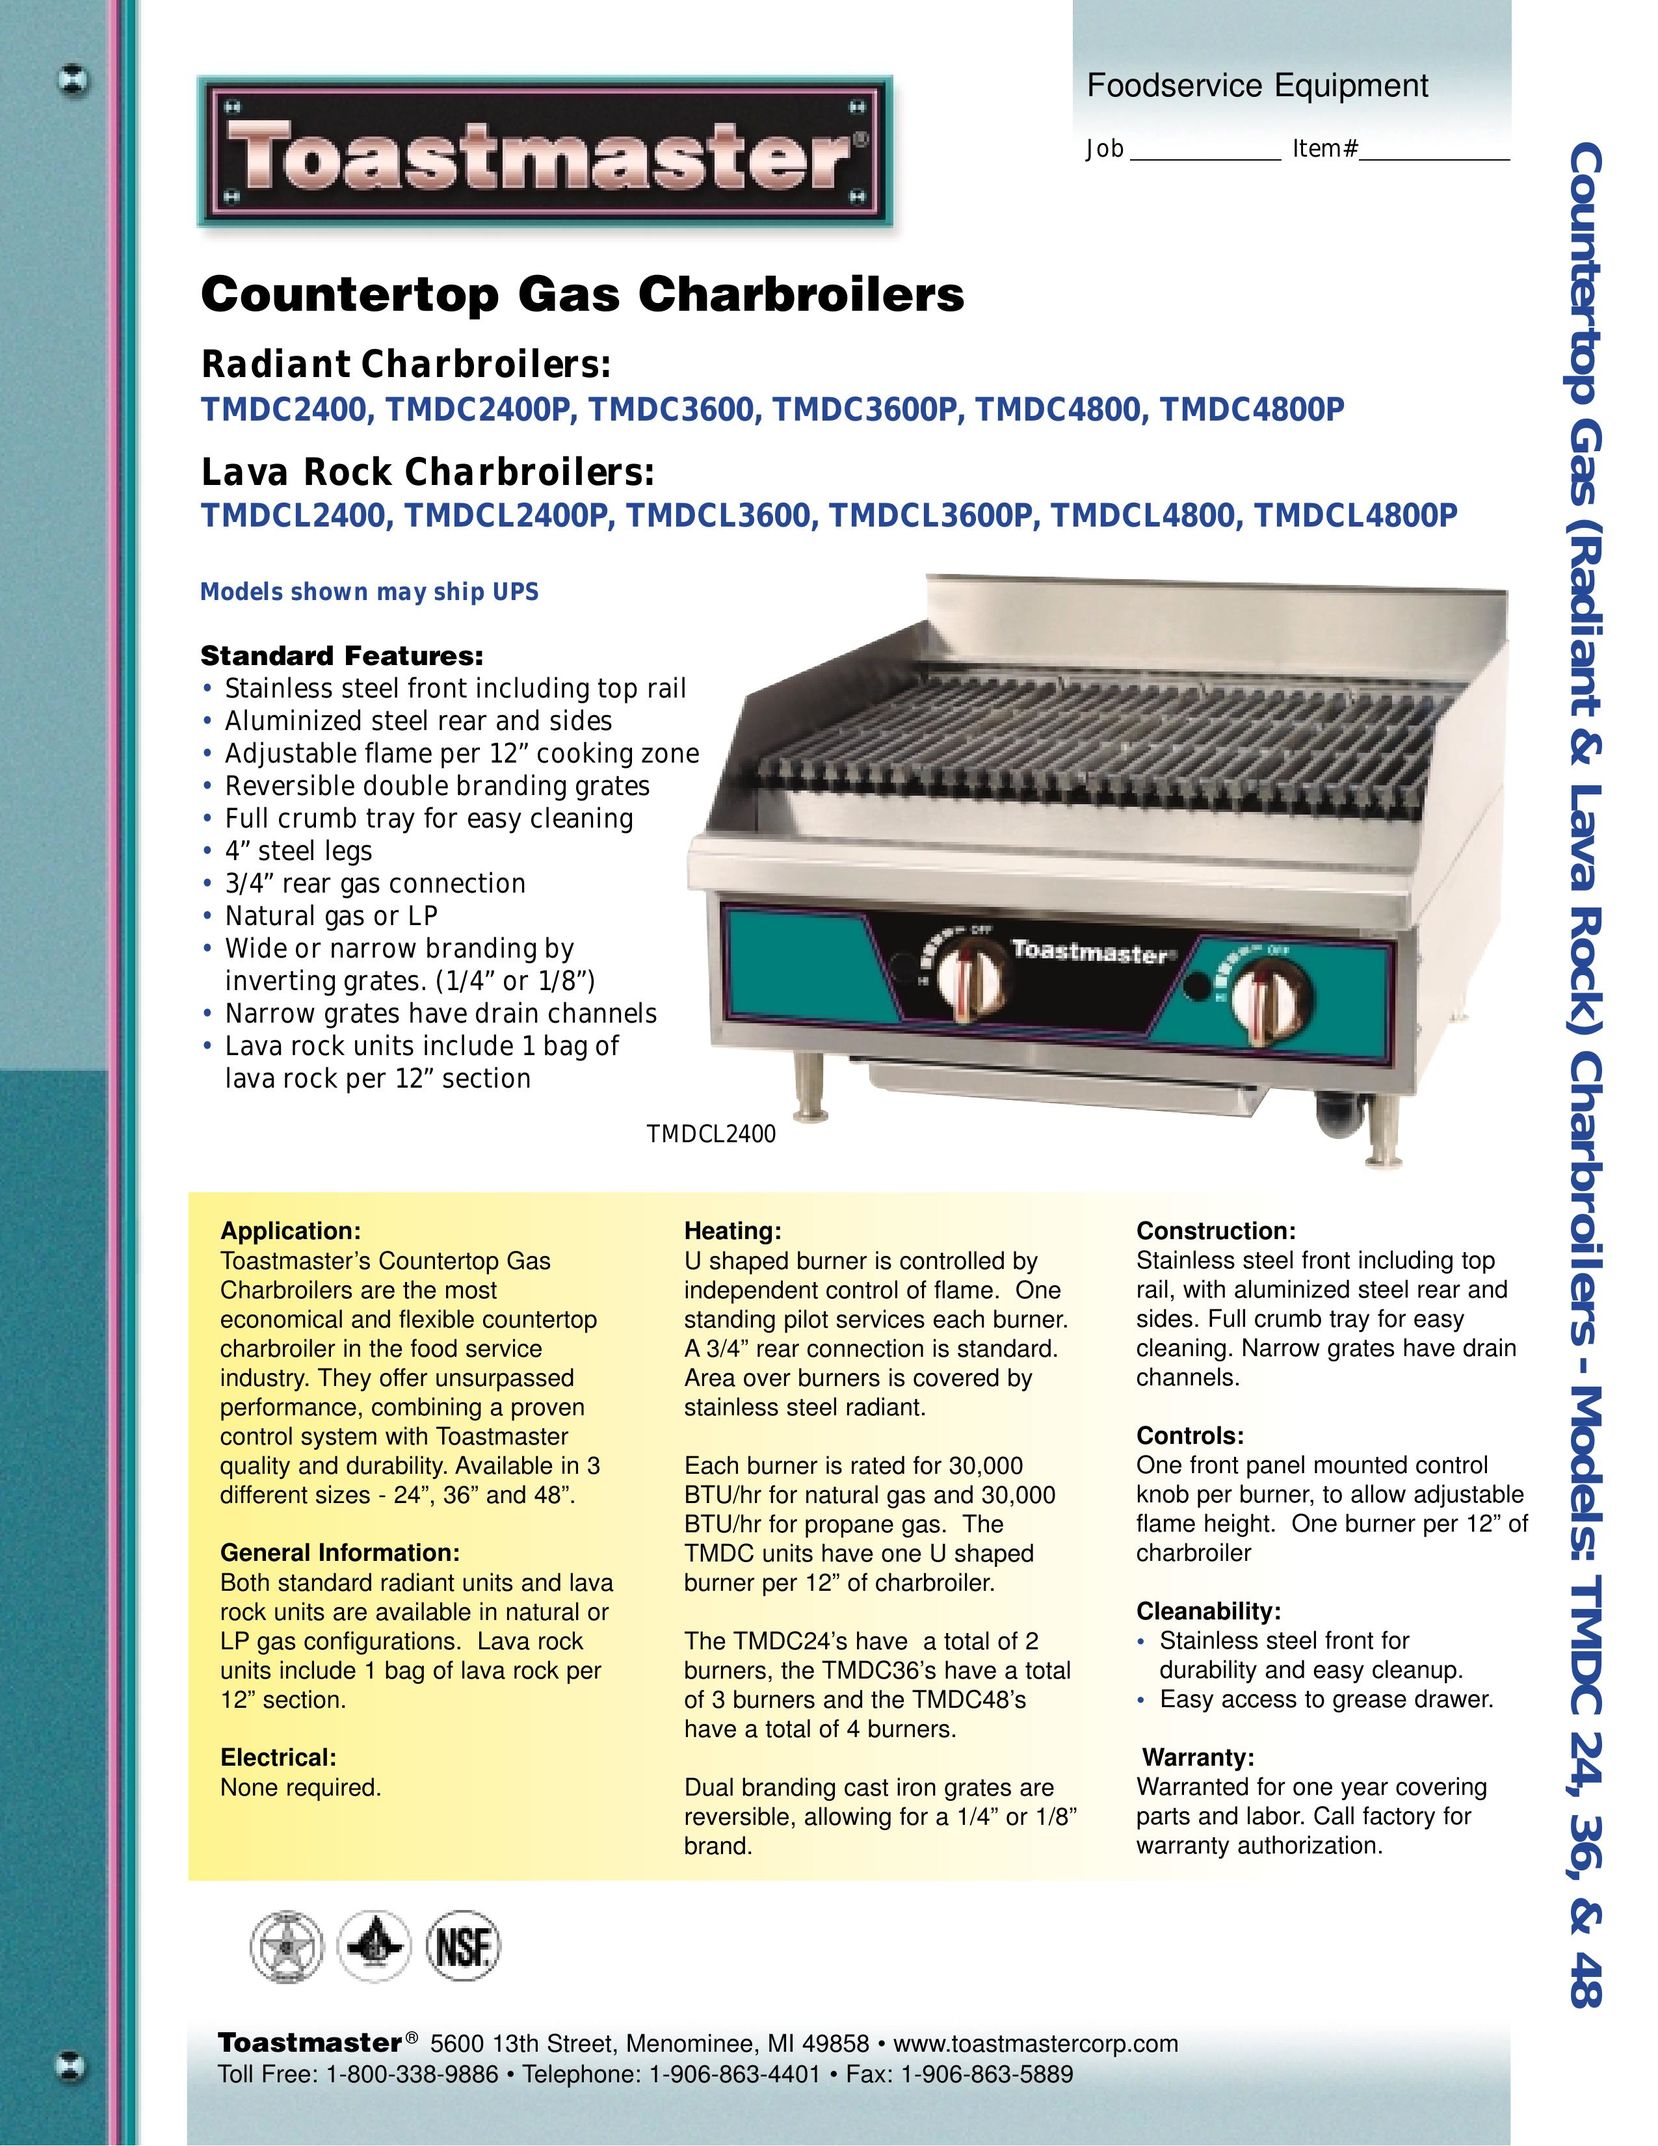 Toastmaster TMDC3600P Oven User Manual